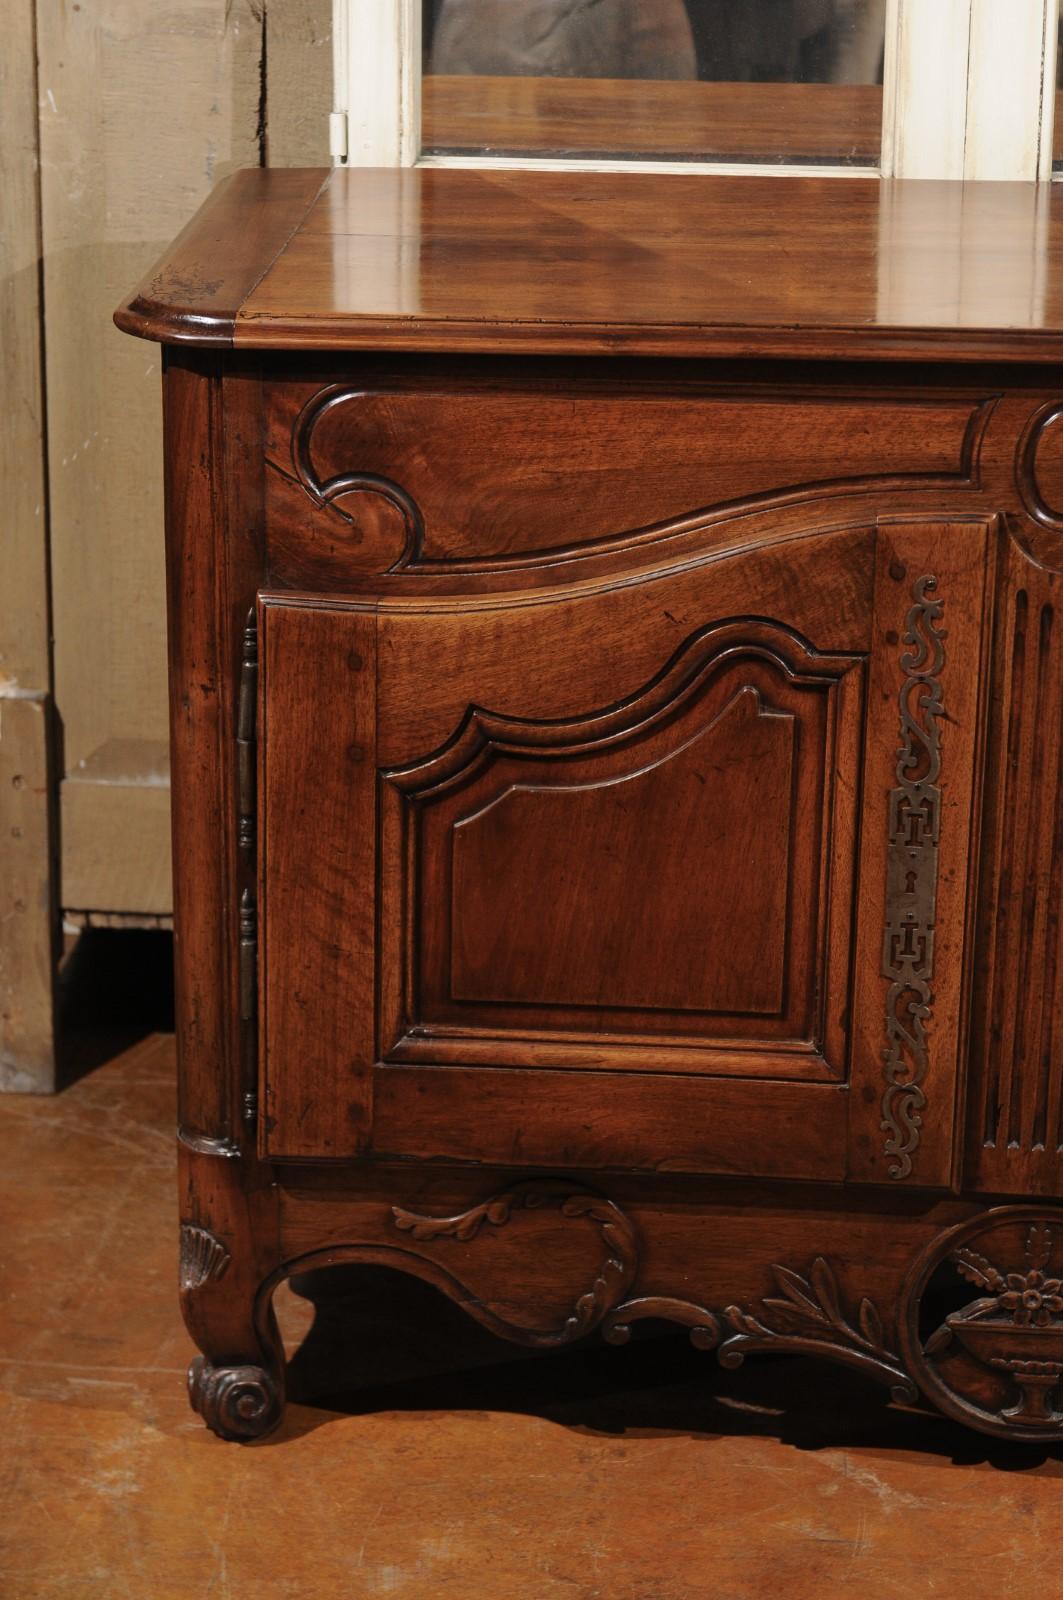 Hand-Carved French Consulate Period 1800s Walnut Buffet with Carved Foliage and Urn Motifs